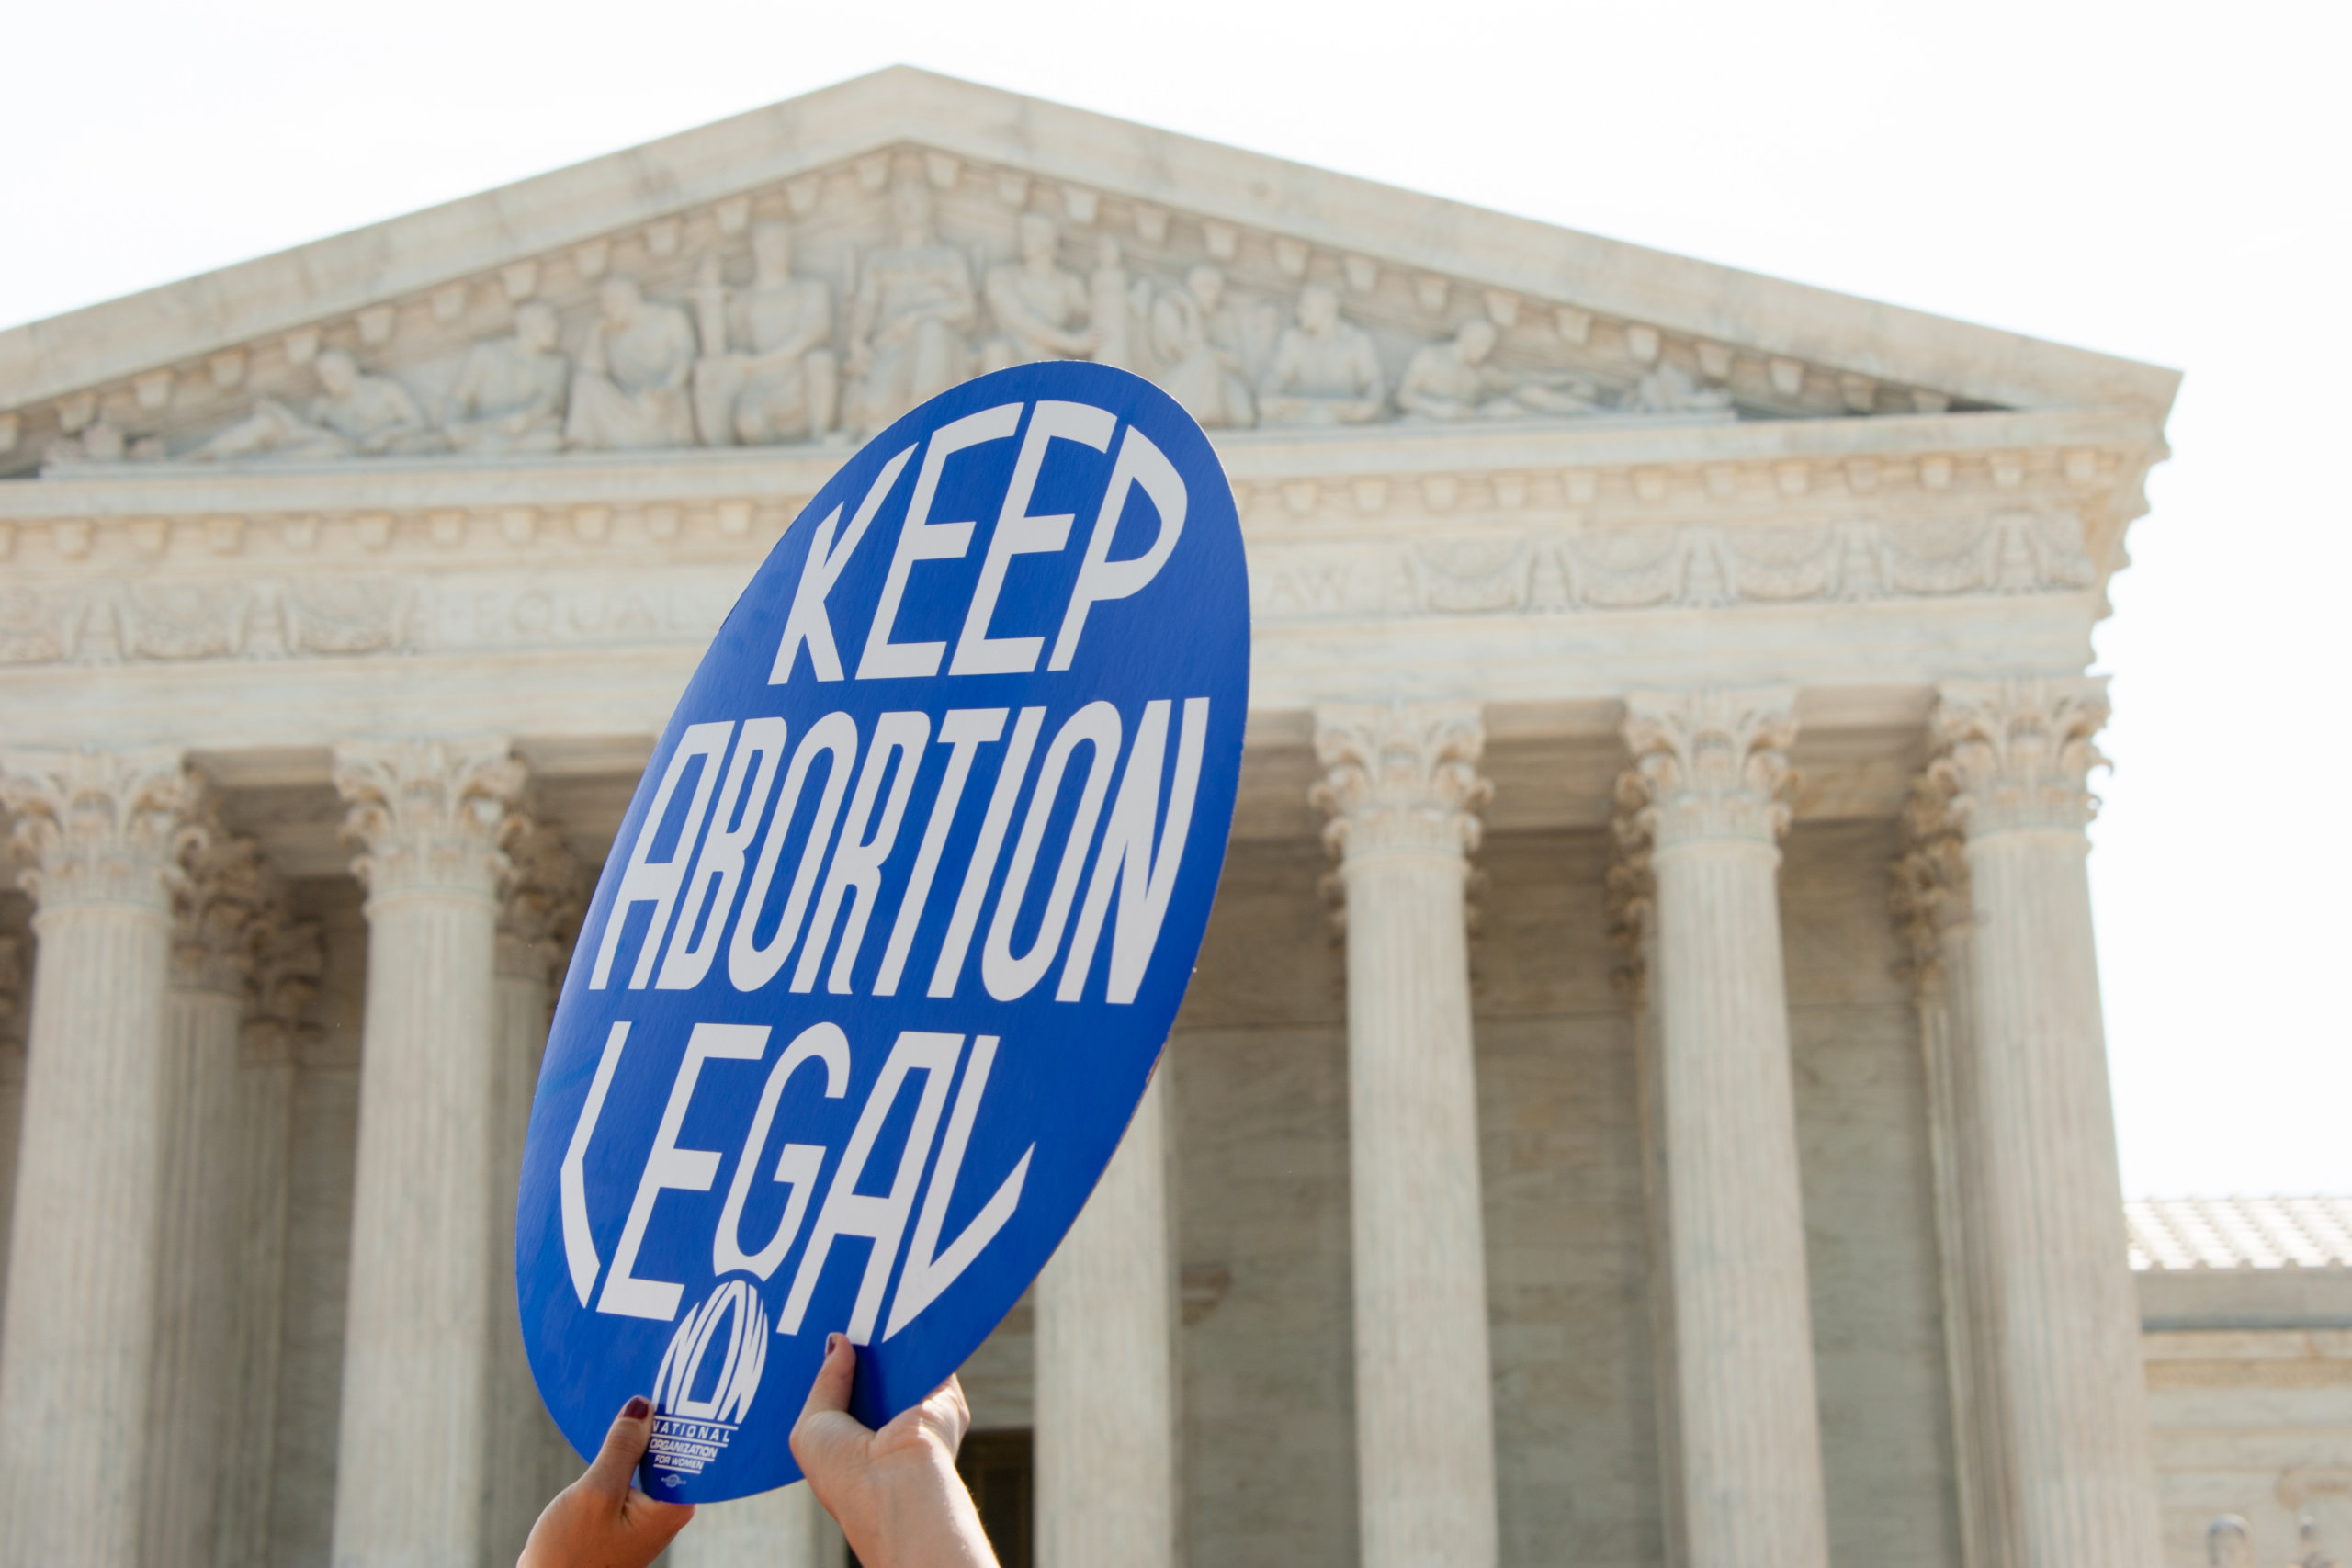 Abortion will remain legal in New Mexico, even after U.S. Supreme Court decision